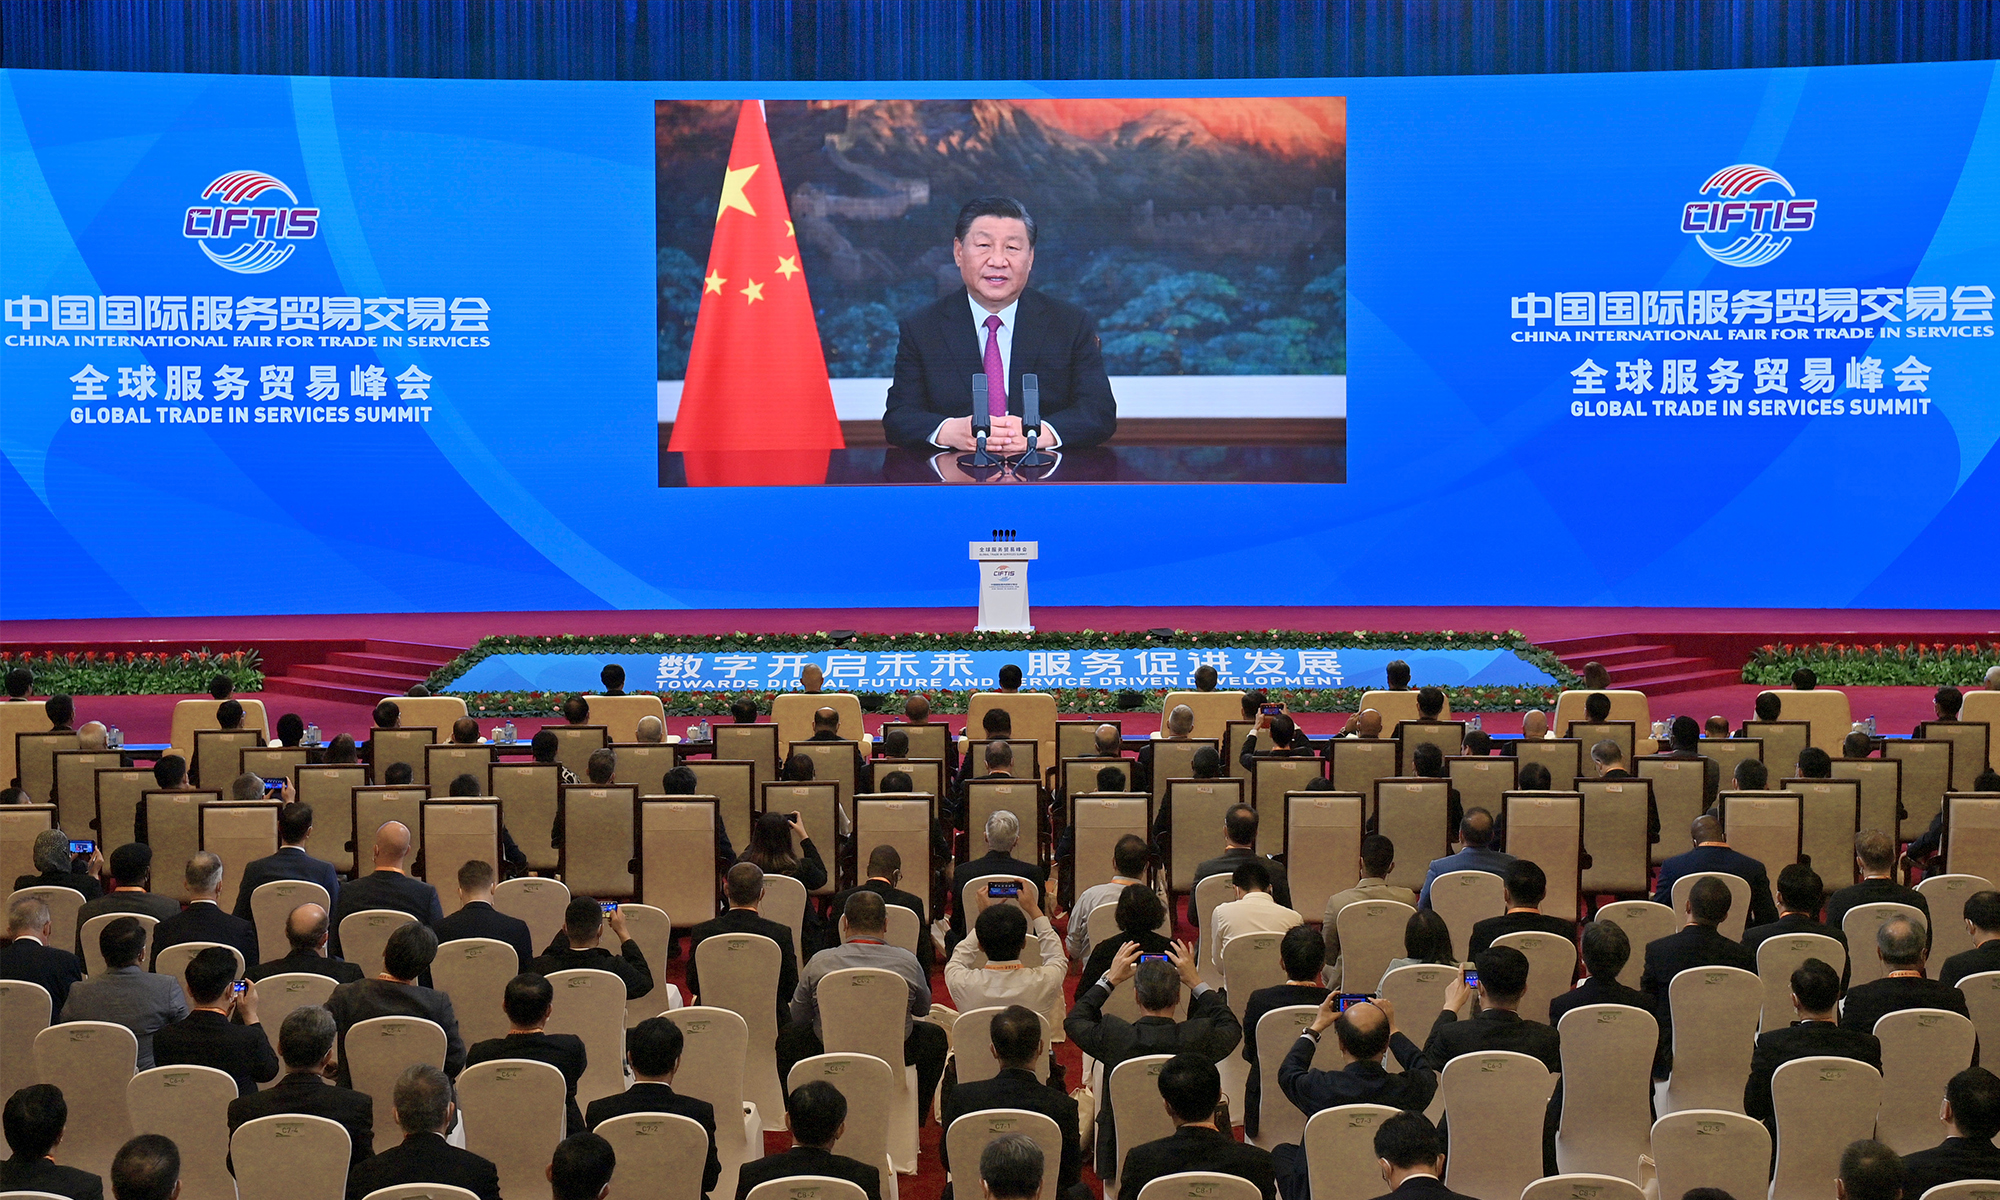 Chinese President Xi Jinping addresses the Global Trade in Services Summit of the 2021 China International Fair for Trade in Services via video on Thursday. Photo: Xinhua